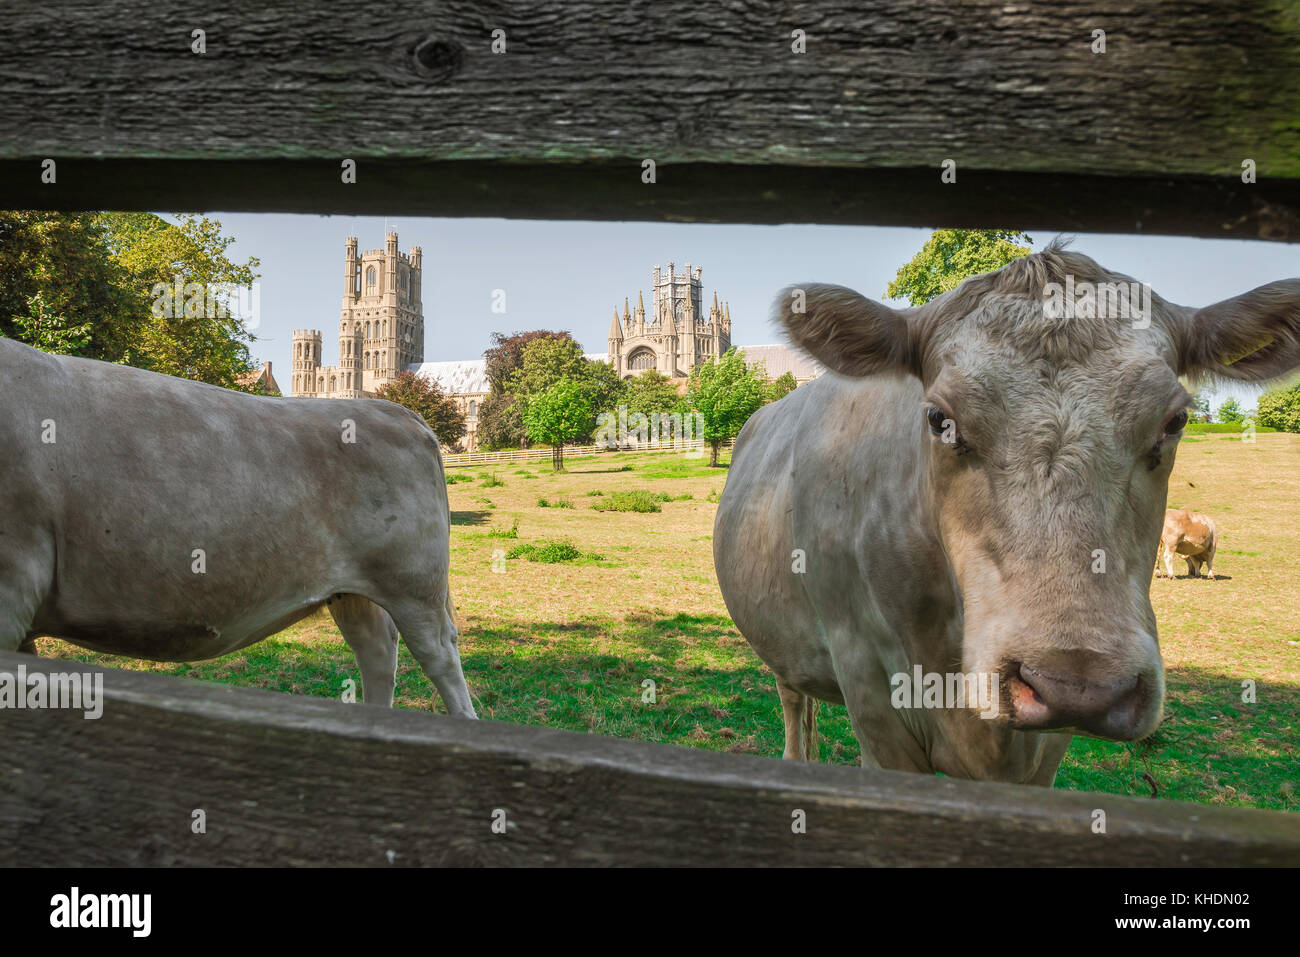 Cows UK countryside, close-up of view of cattle in Cherry Hill Park near the East Anglian cathedral town of Ely in Cambridgeshire, England, UK Stock Photo